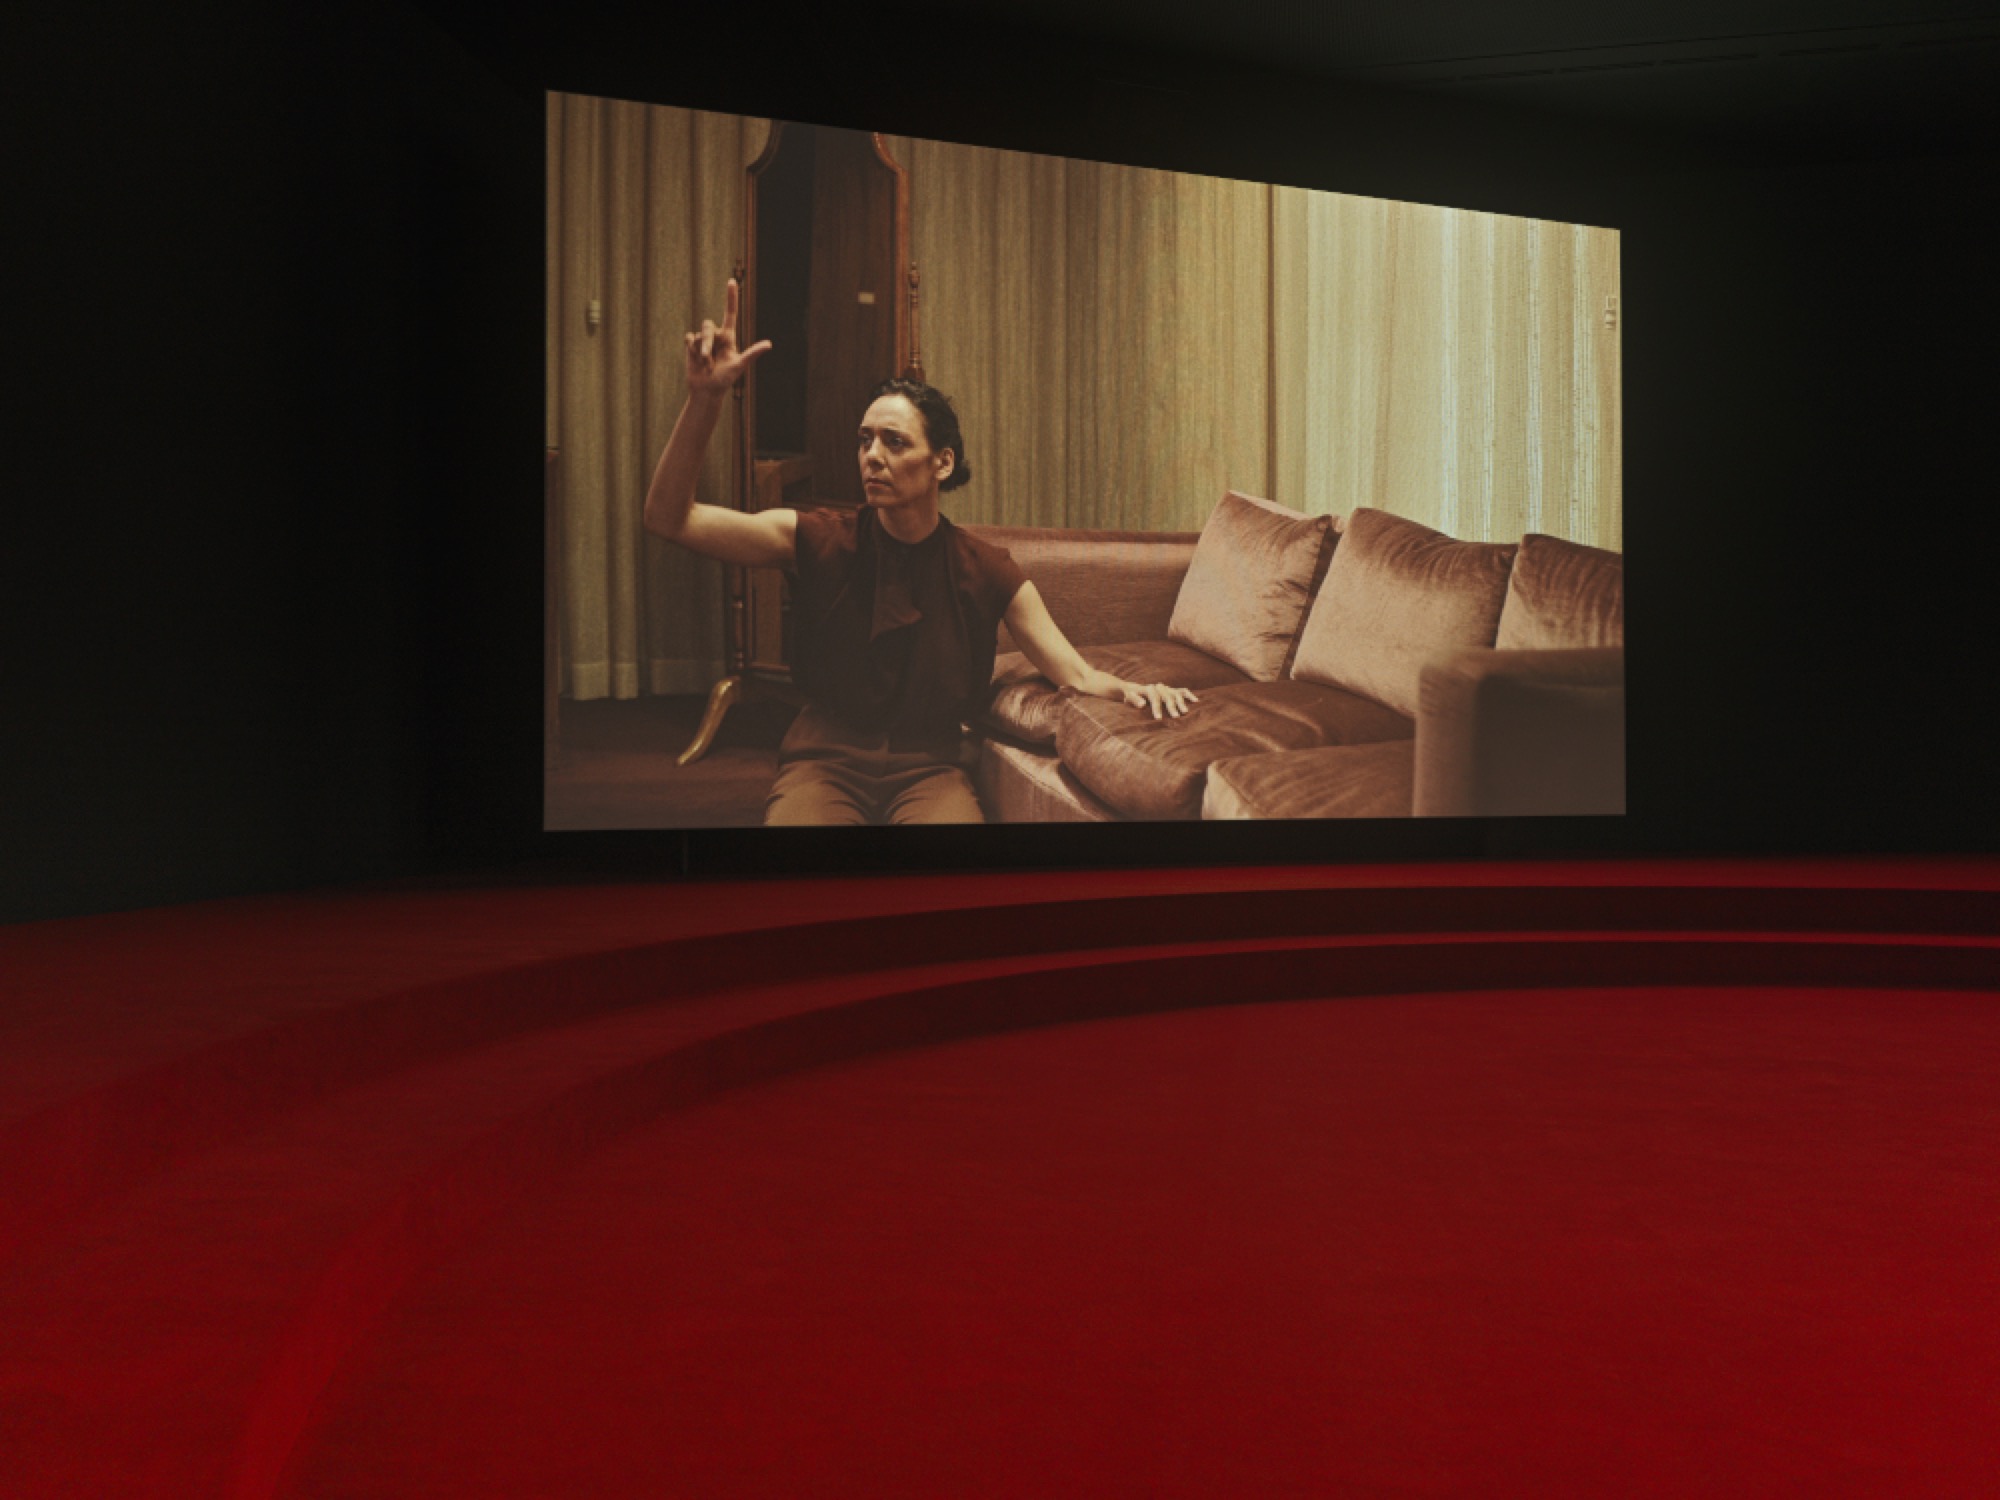 Angelica Mesiti, <em>ASSEMBLY</em>, 2019 (installation shot) three-channel video installation in architectural amphitheater. HD video projections, color, six-channel mono sound, 25 mins, dimensions variable. © Photography: Josh Raymond. Commissioned by the Australia Council for the Arts on the occasion of the 58th International Art Exhibition–La Biennale di Venezia. Courtesy of the artist and Anna Schwartz Gallery, Australia and Galerie Allen, Paris.